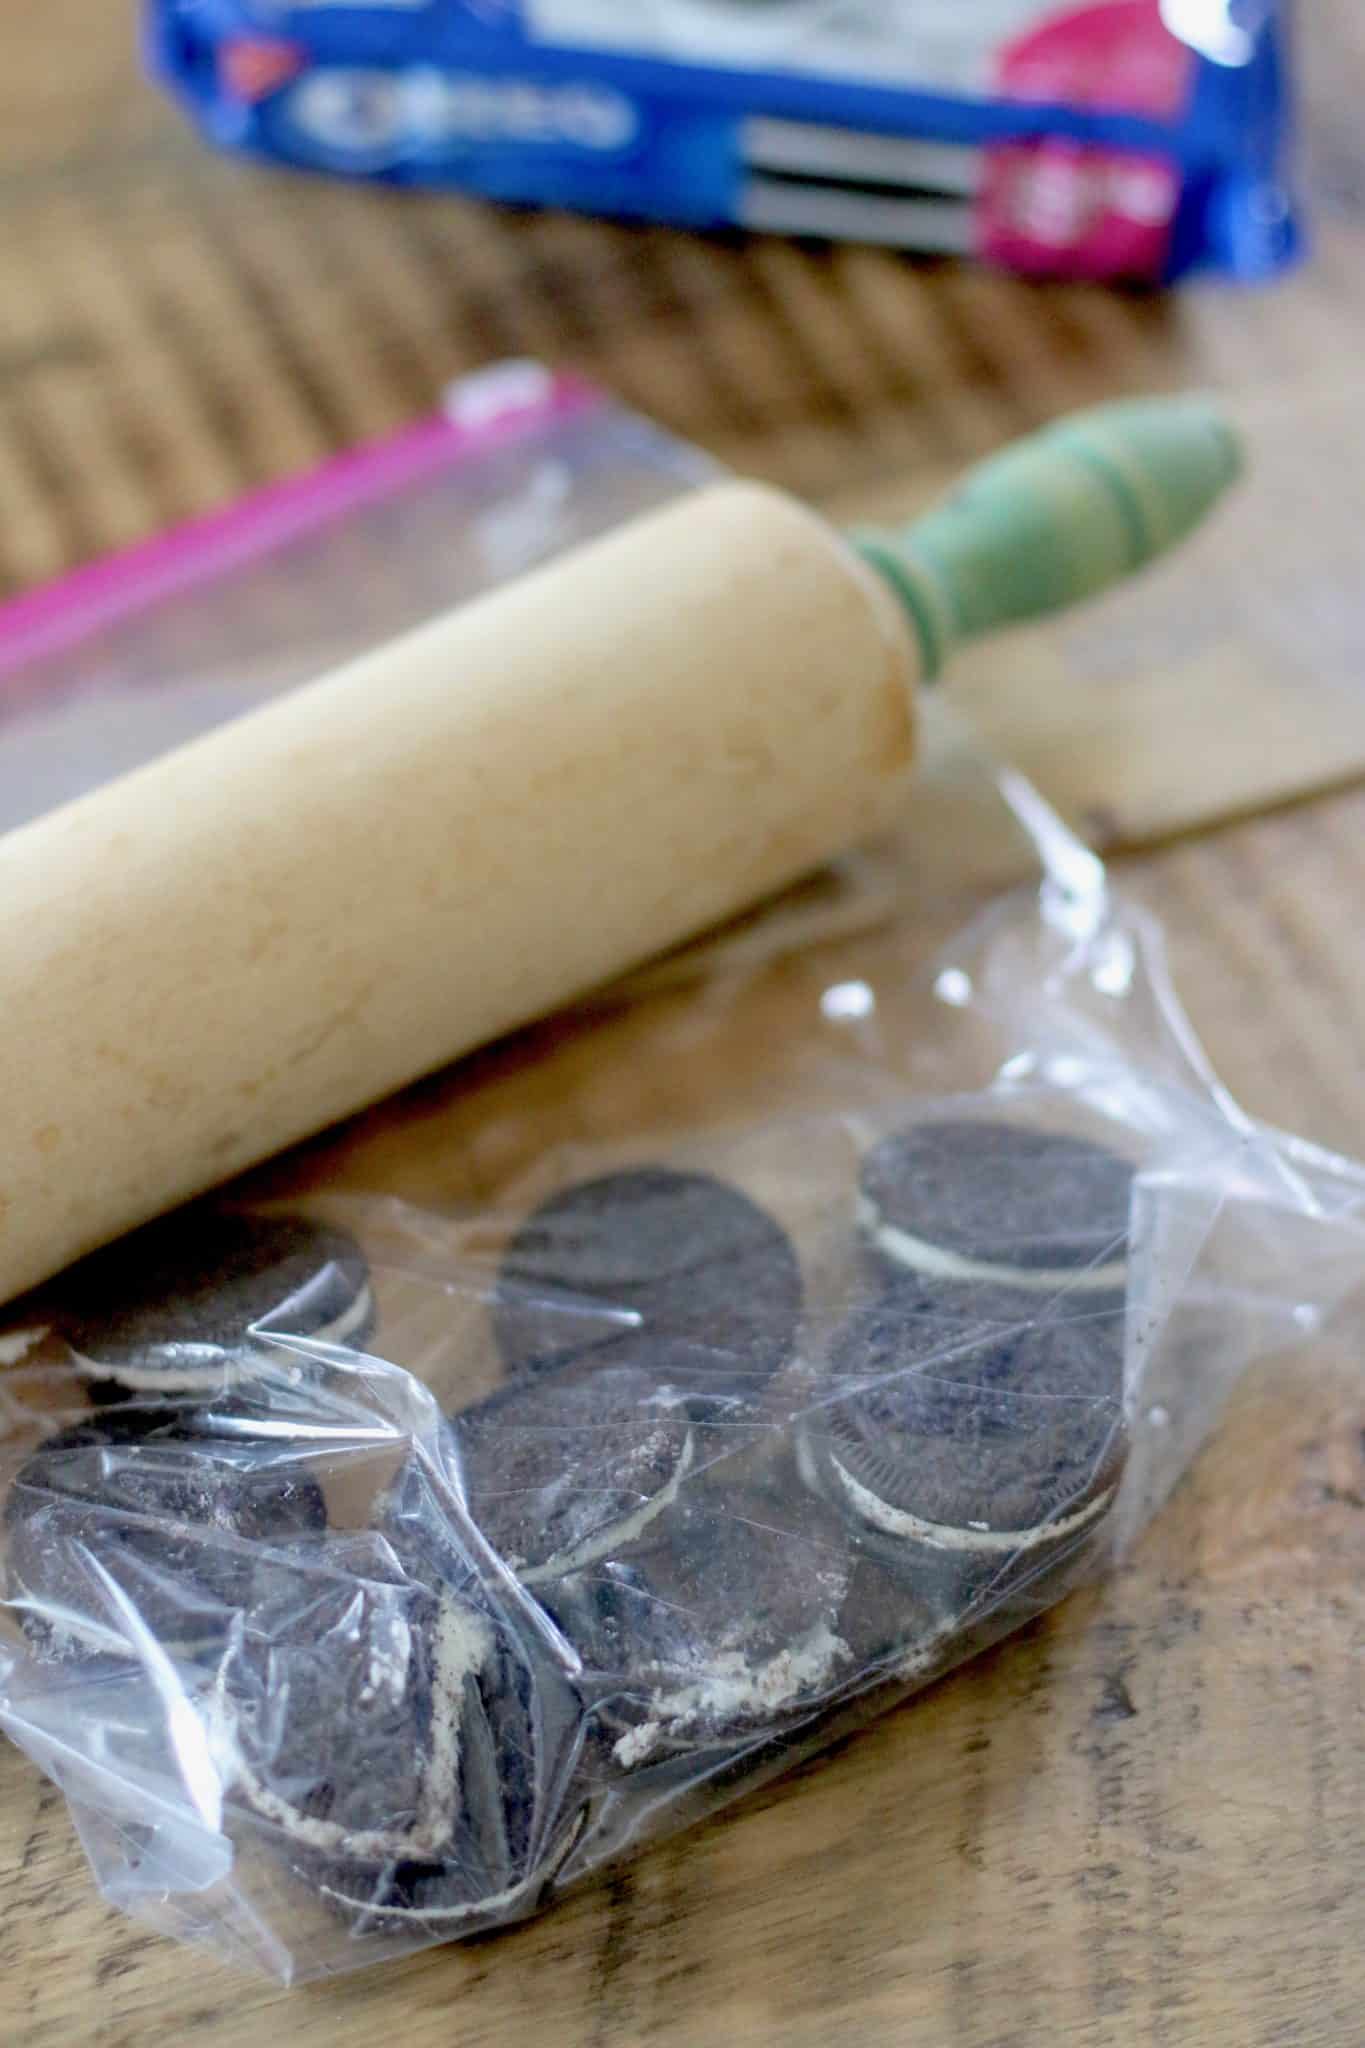 rolling pin crushing Oreos in a plastic bag.